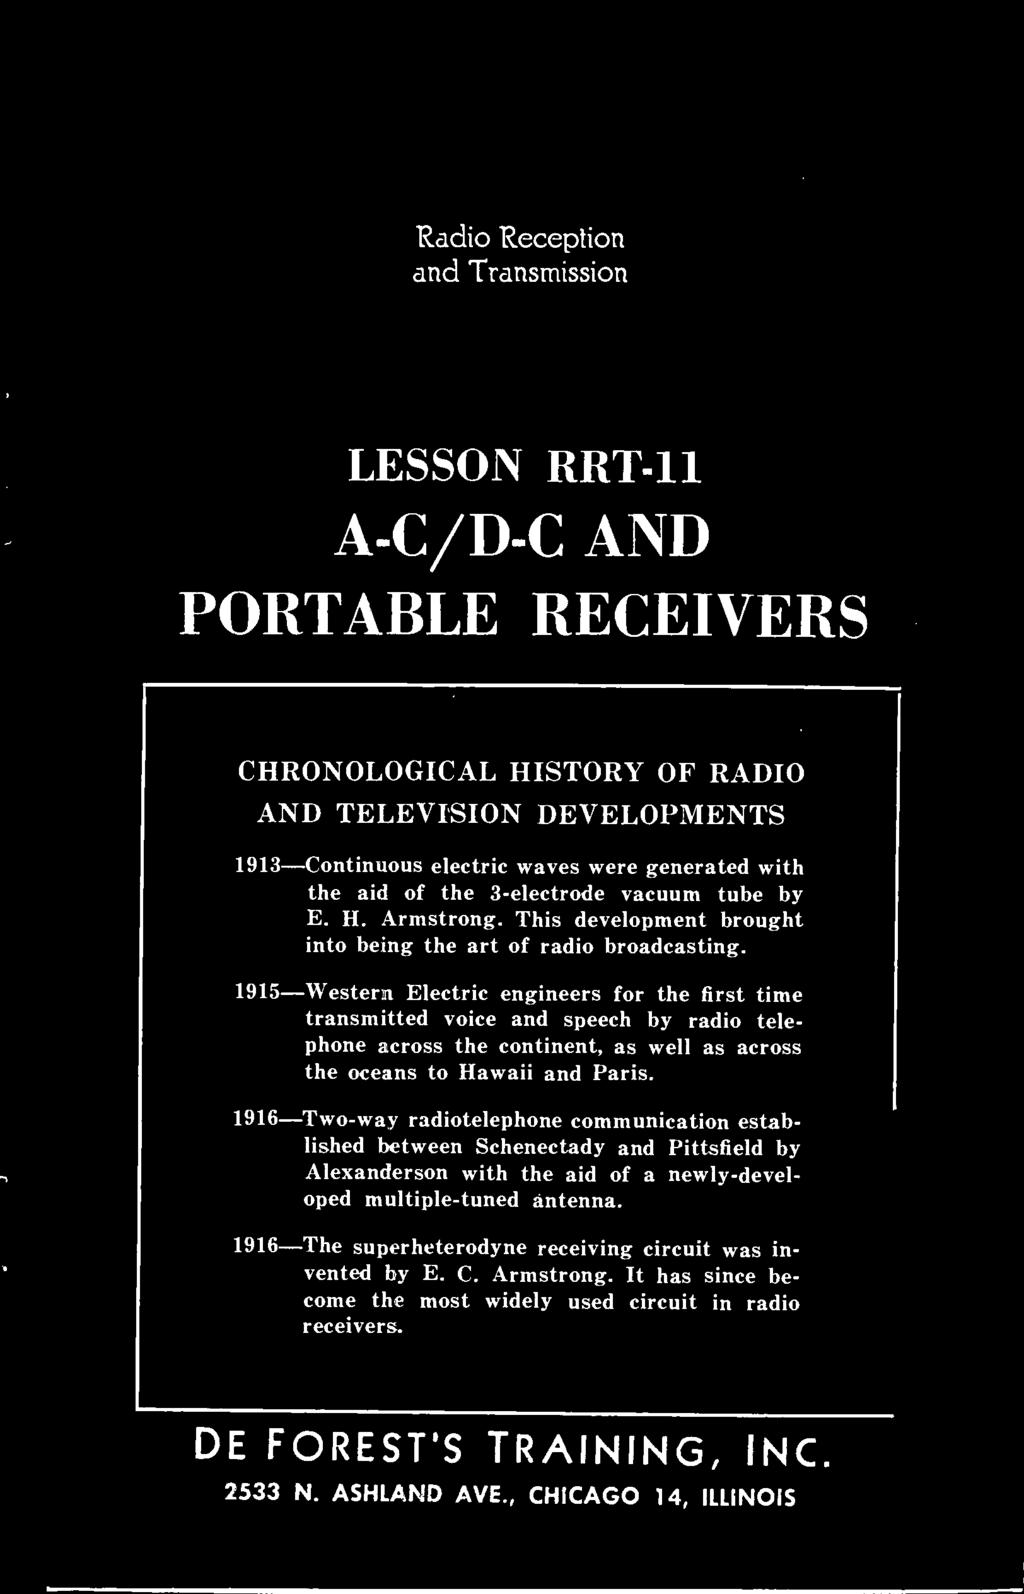 Radio Reception and Transmission LESSON RRT -11 A -C /D -C AND PORTABLE RECEIVERS CHRONOLOGICAL HISTORY OF RADIO AND TELEVISION DEVELOPMENTS 1913- Continuous electric waves were generated with the